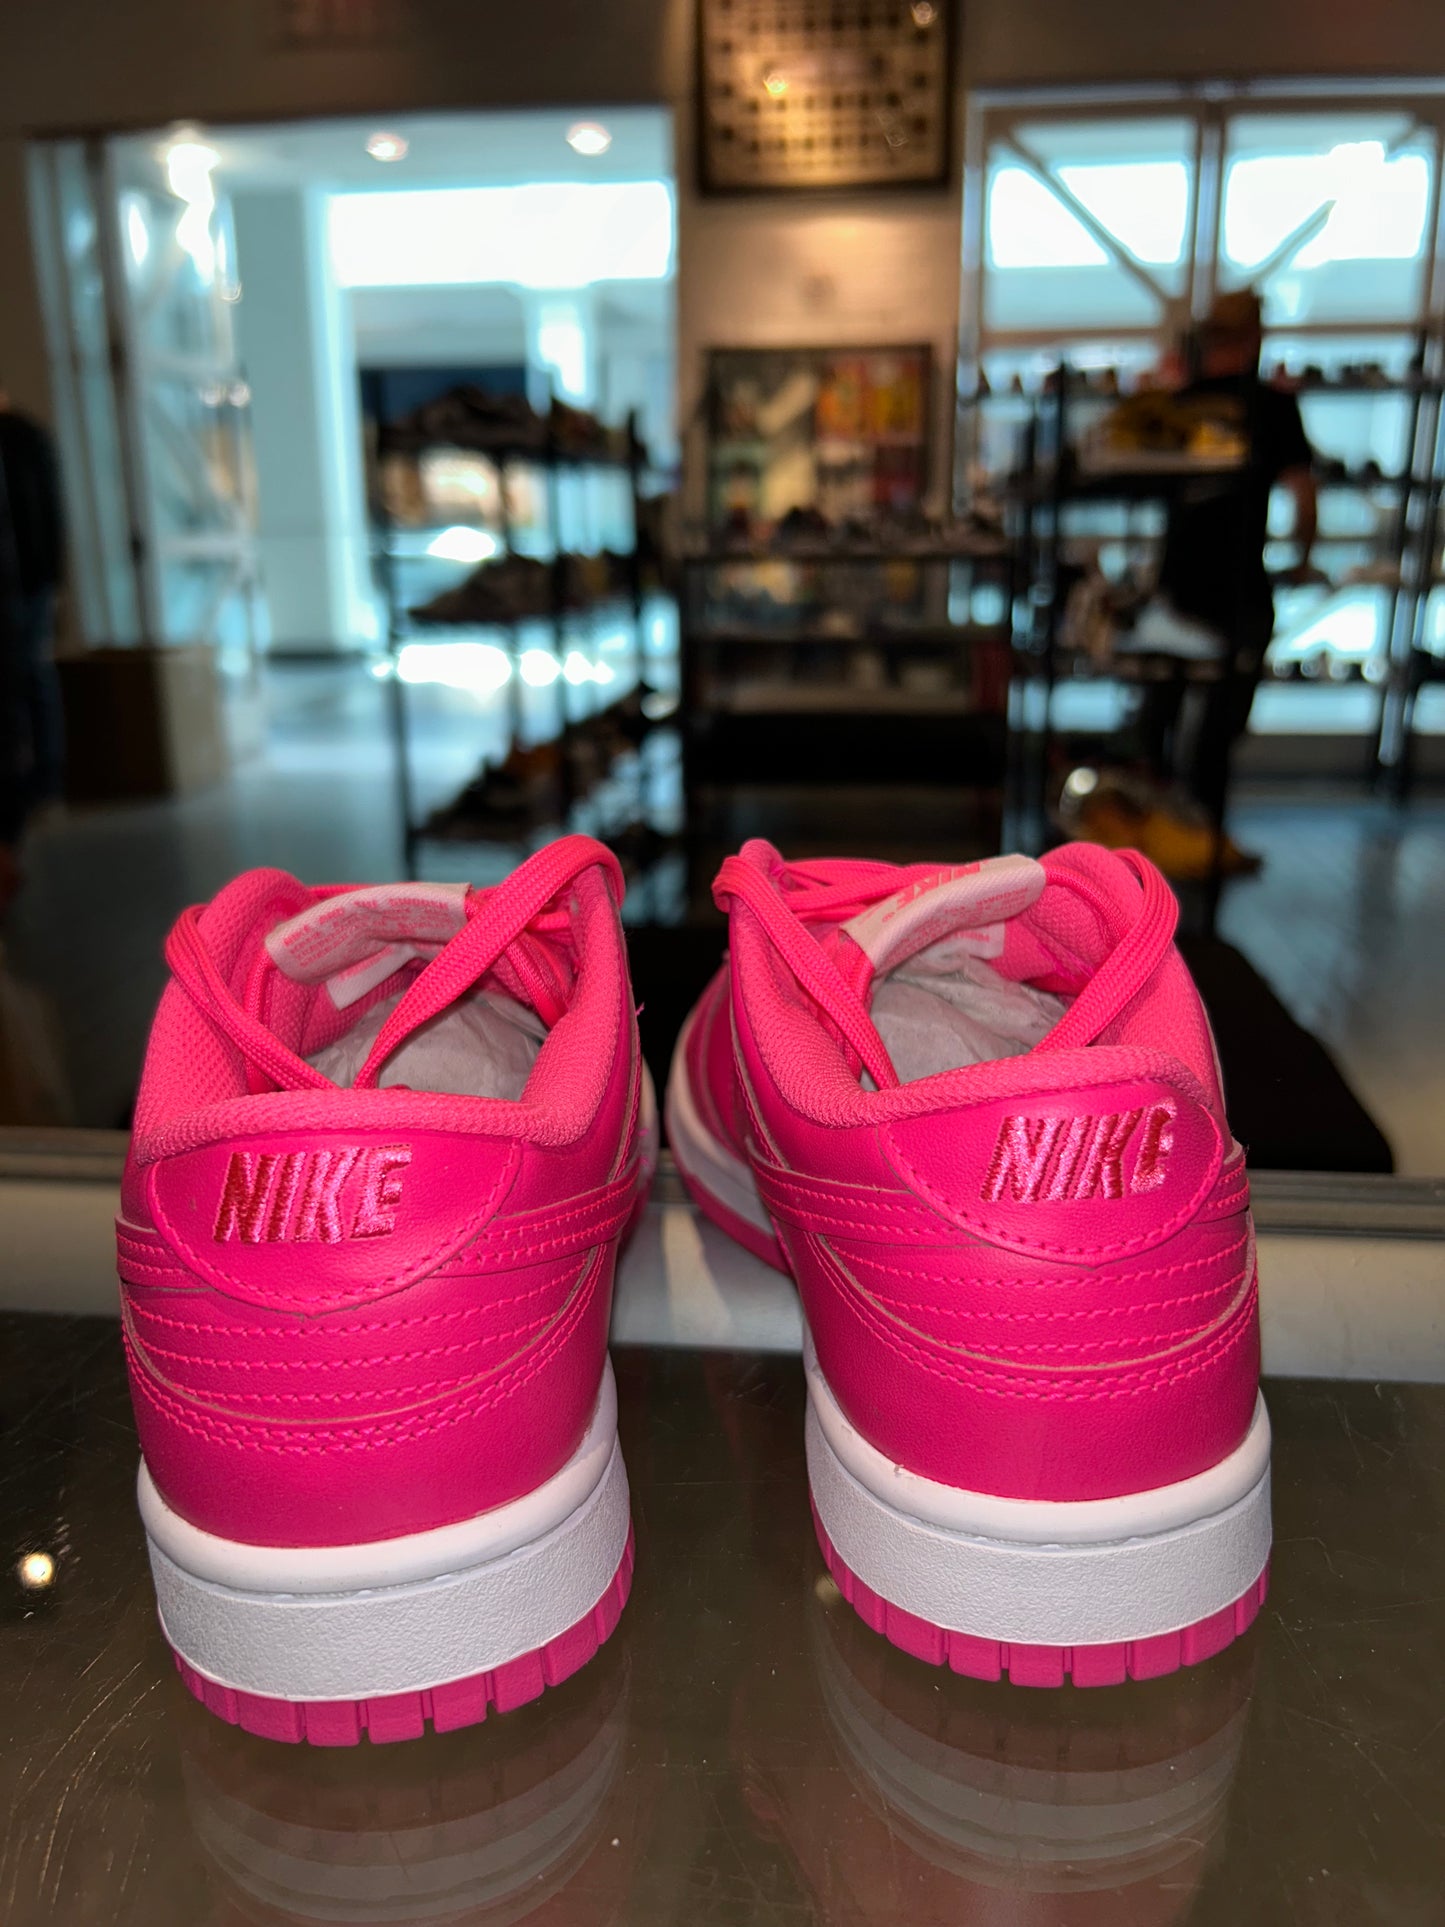 Size 6 (7.5W) Dunk Low “Hyper Pink” Brand New (Mall)